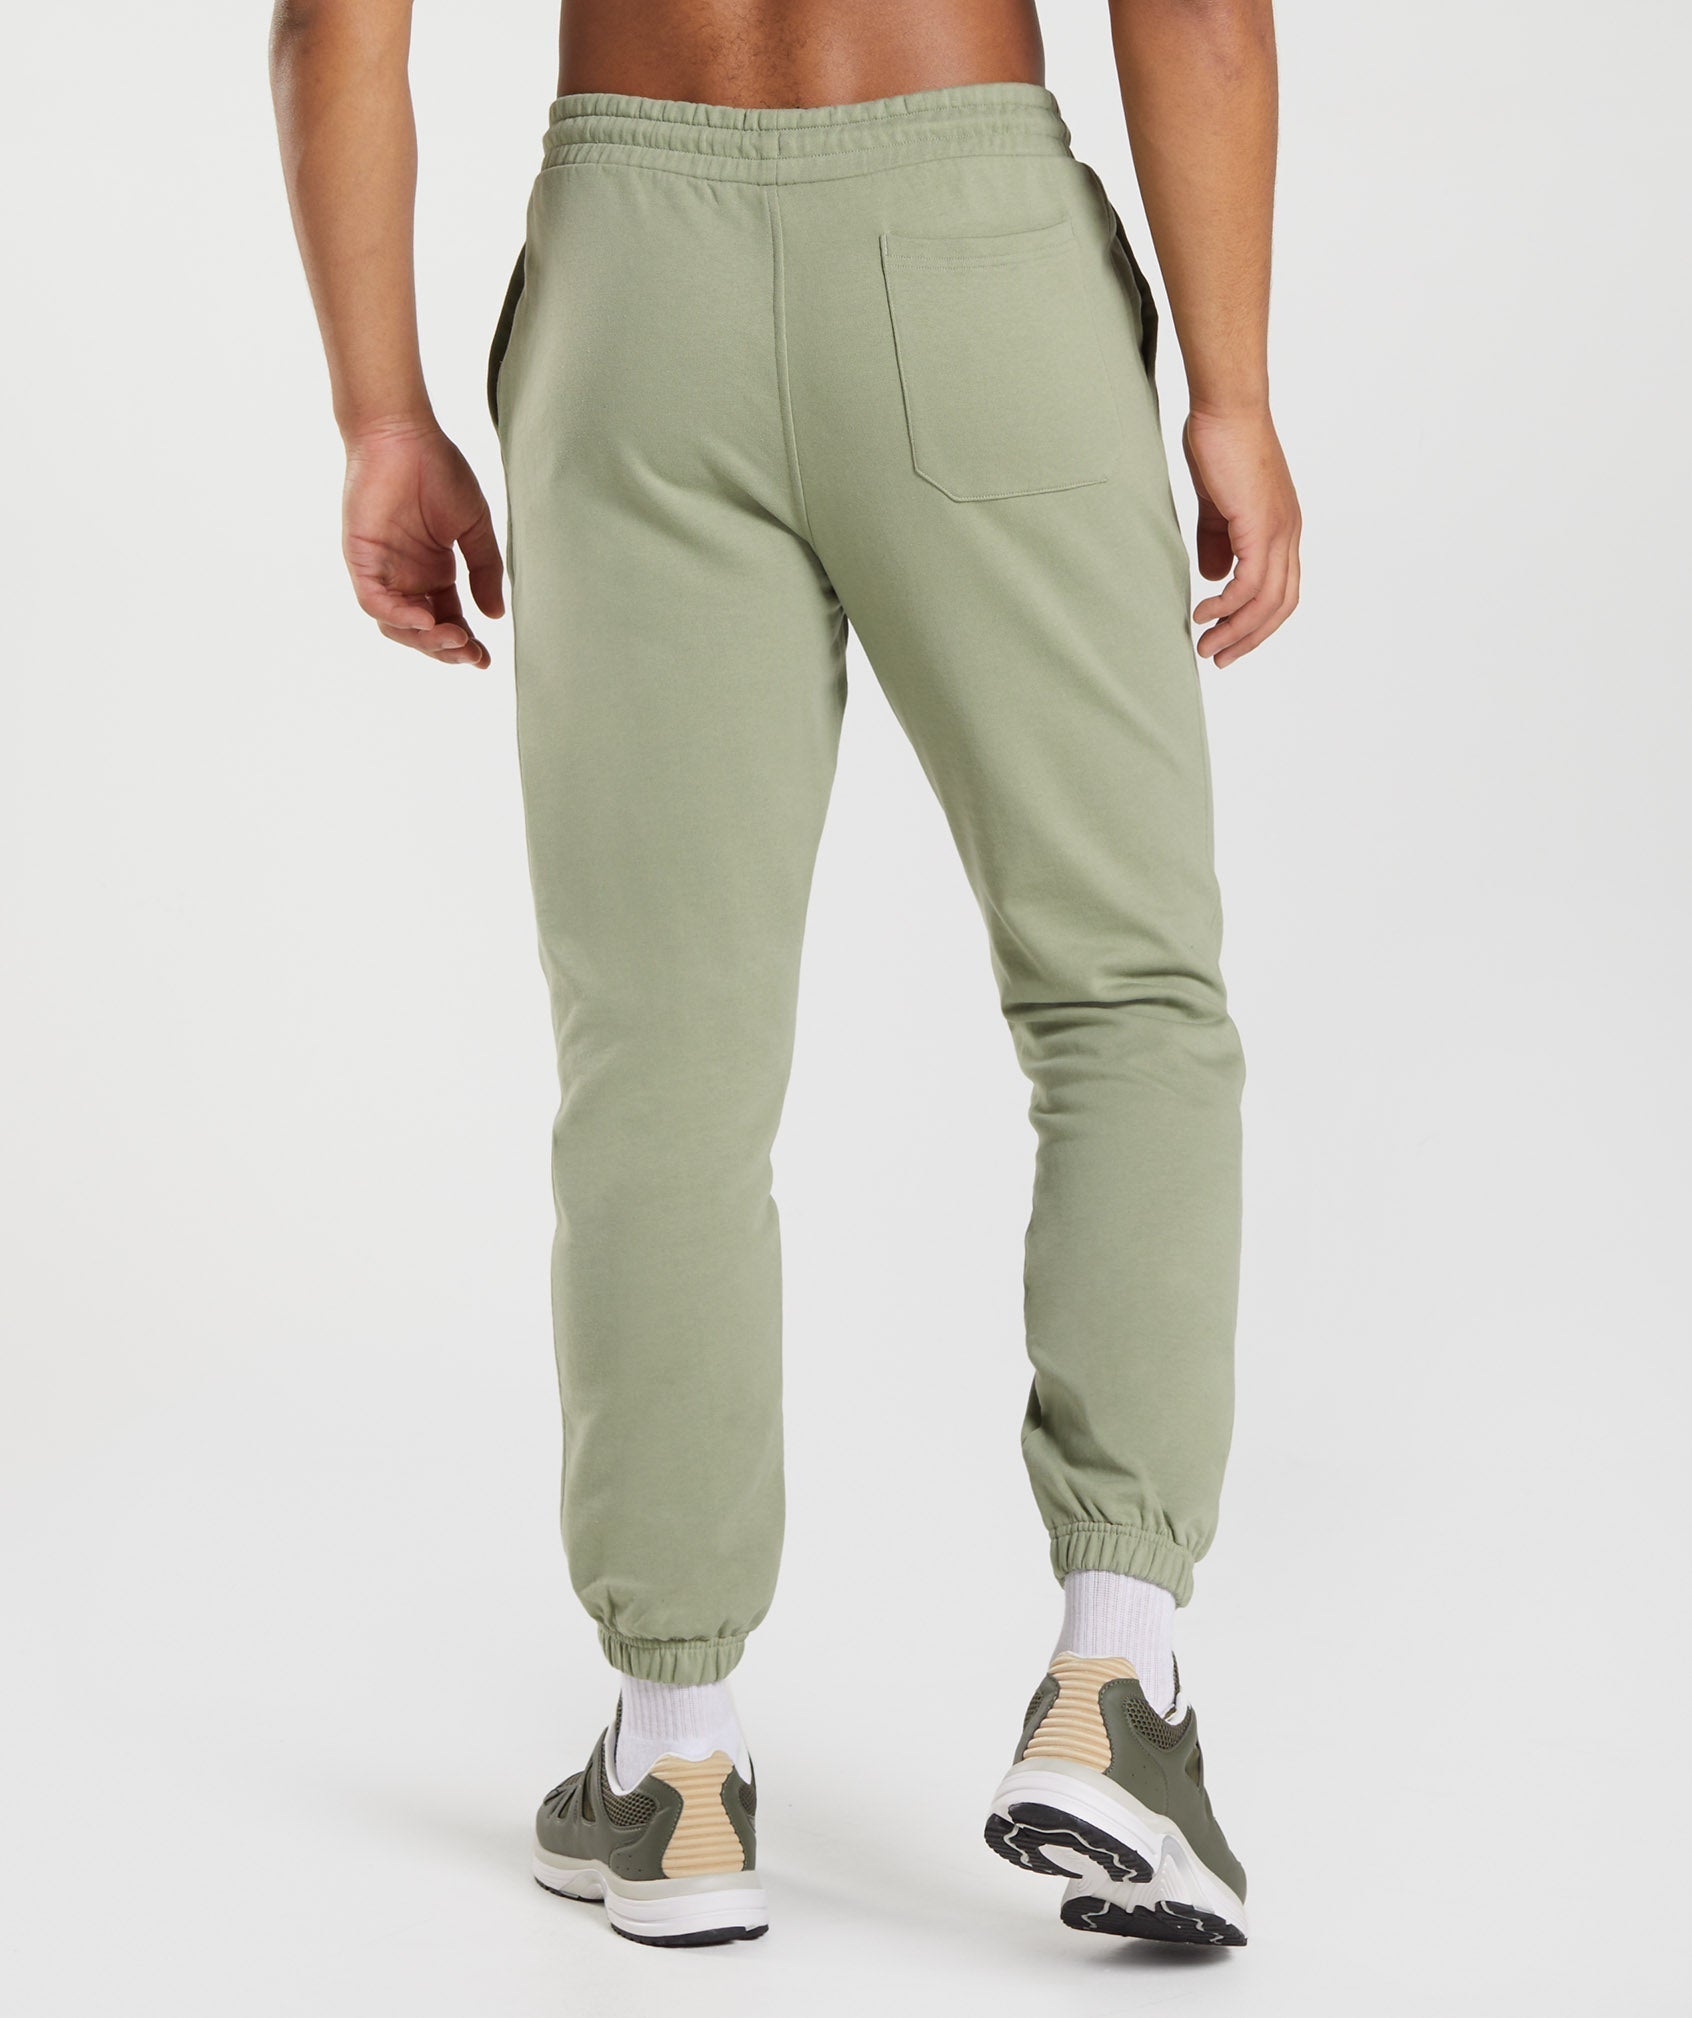 Rest Day Sweats Joggers in Sage Green - view 5